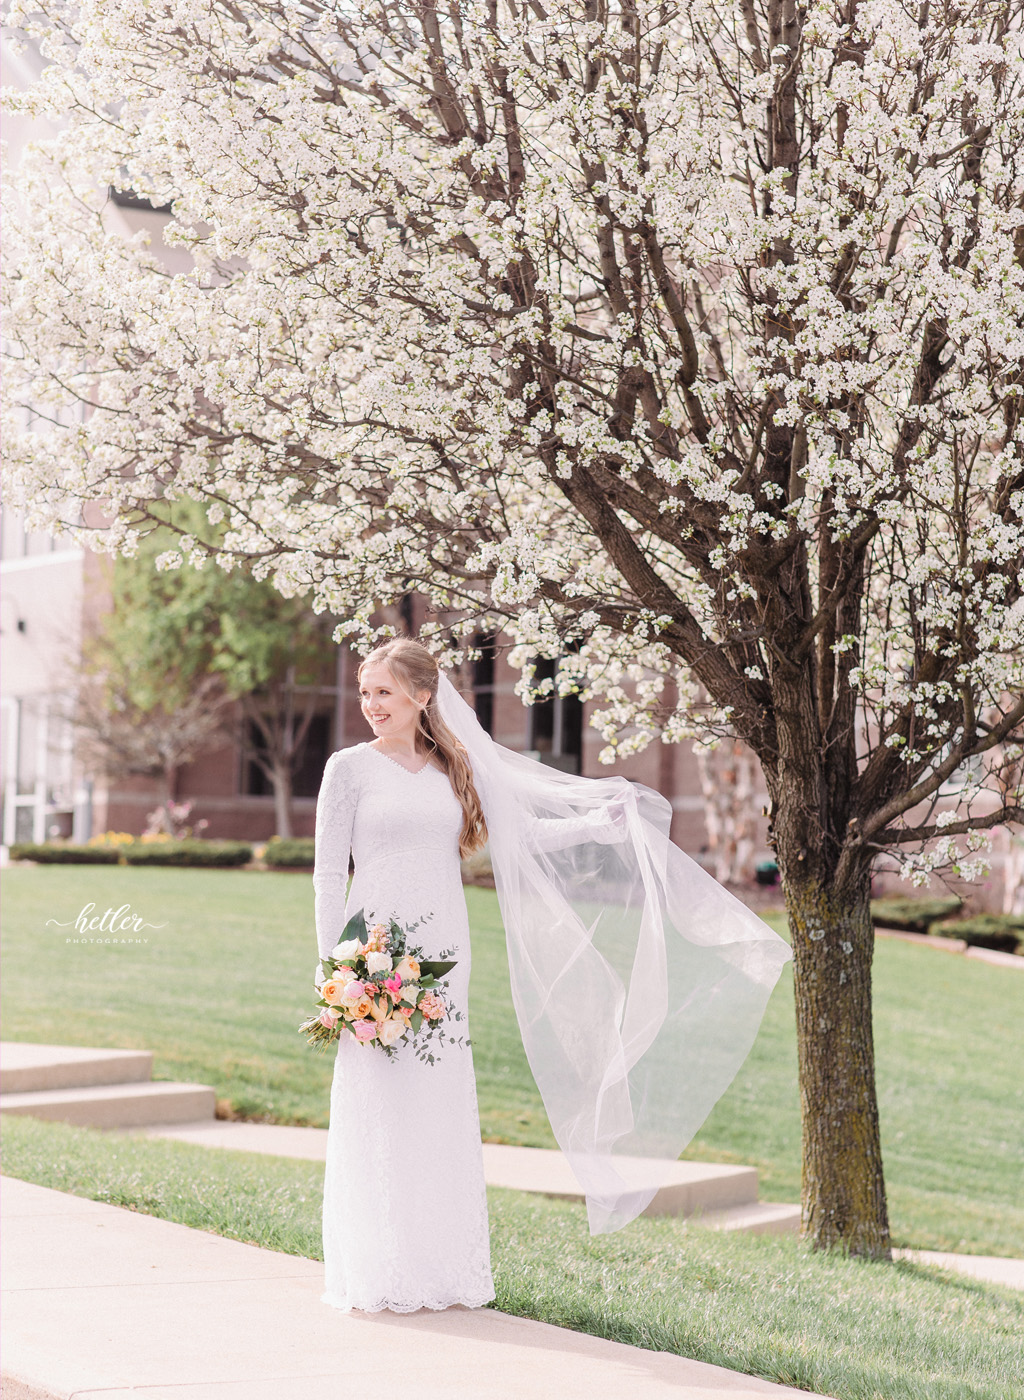 Spring wedding in Warsaw Indiana with a lace wedding gown and cathedral veil